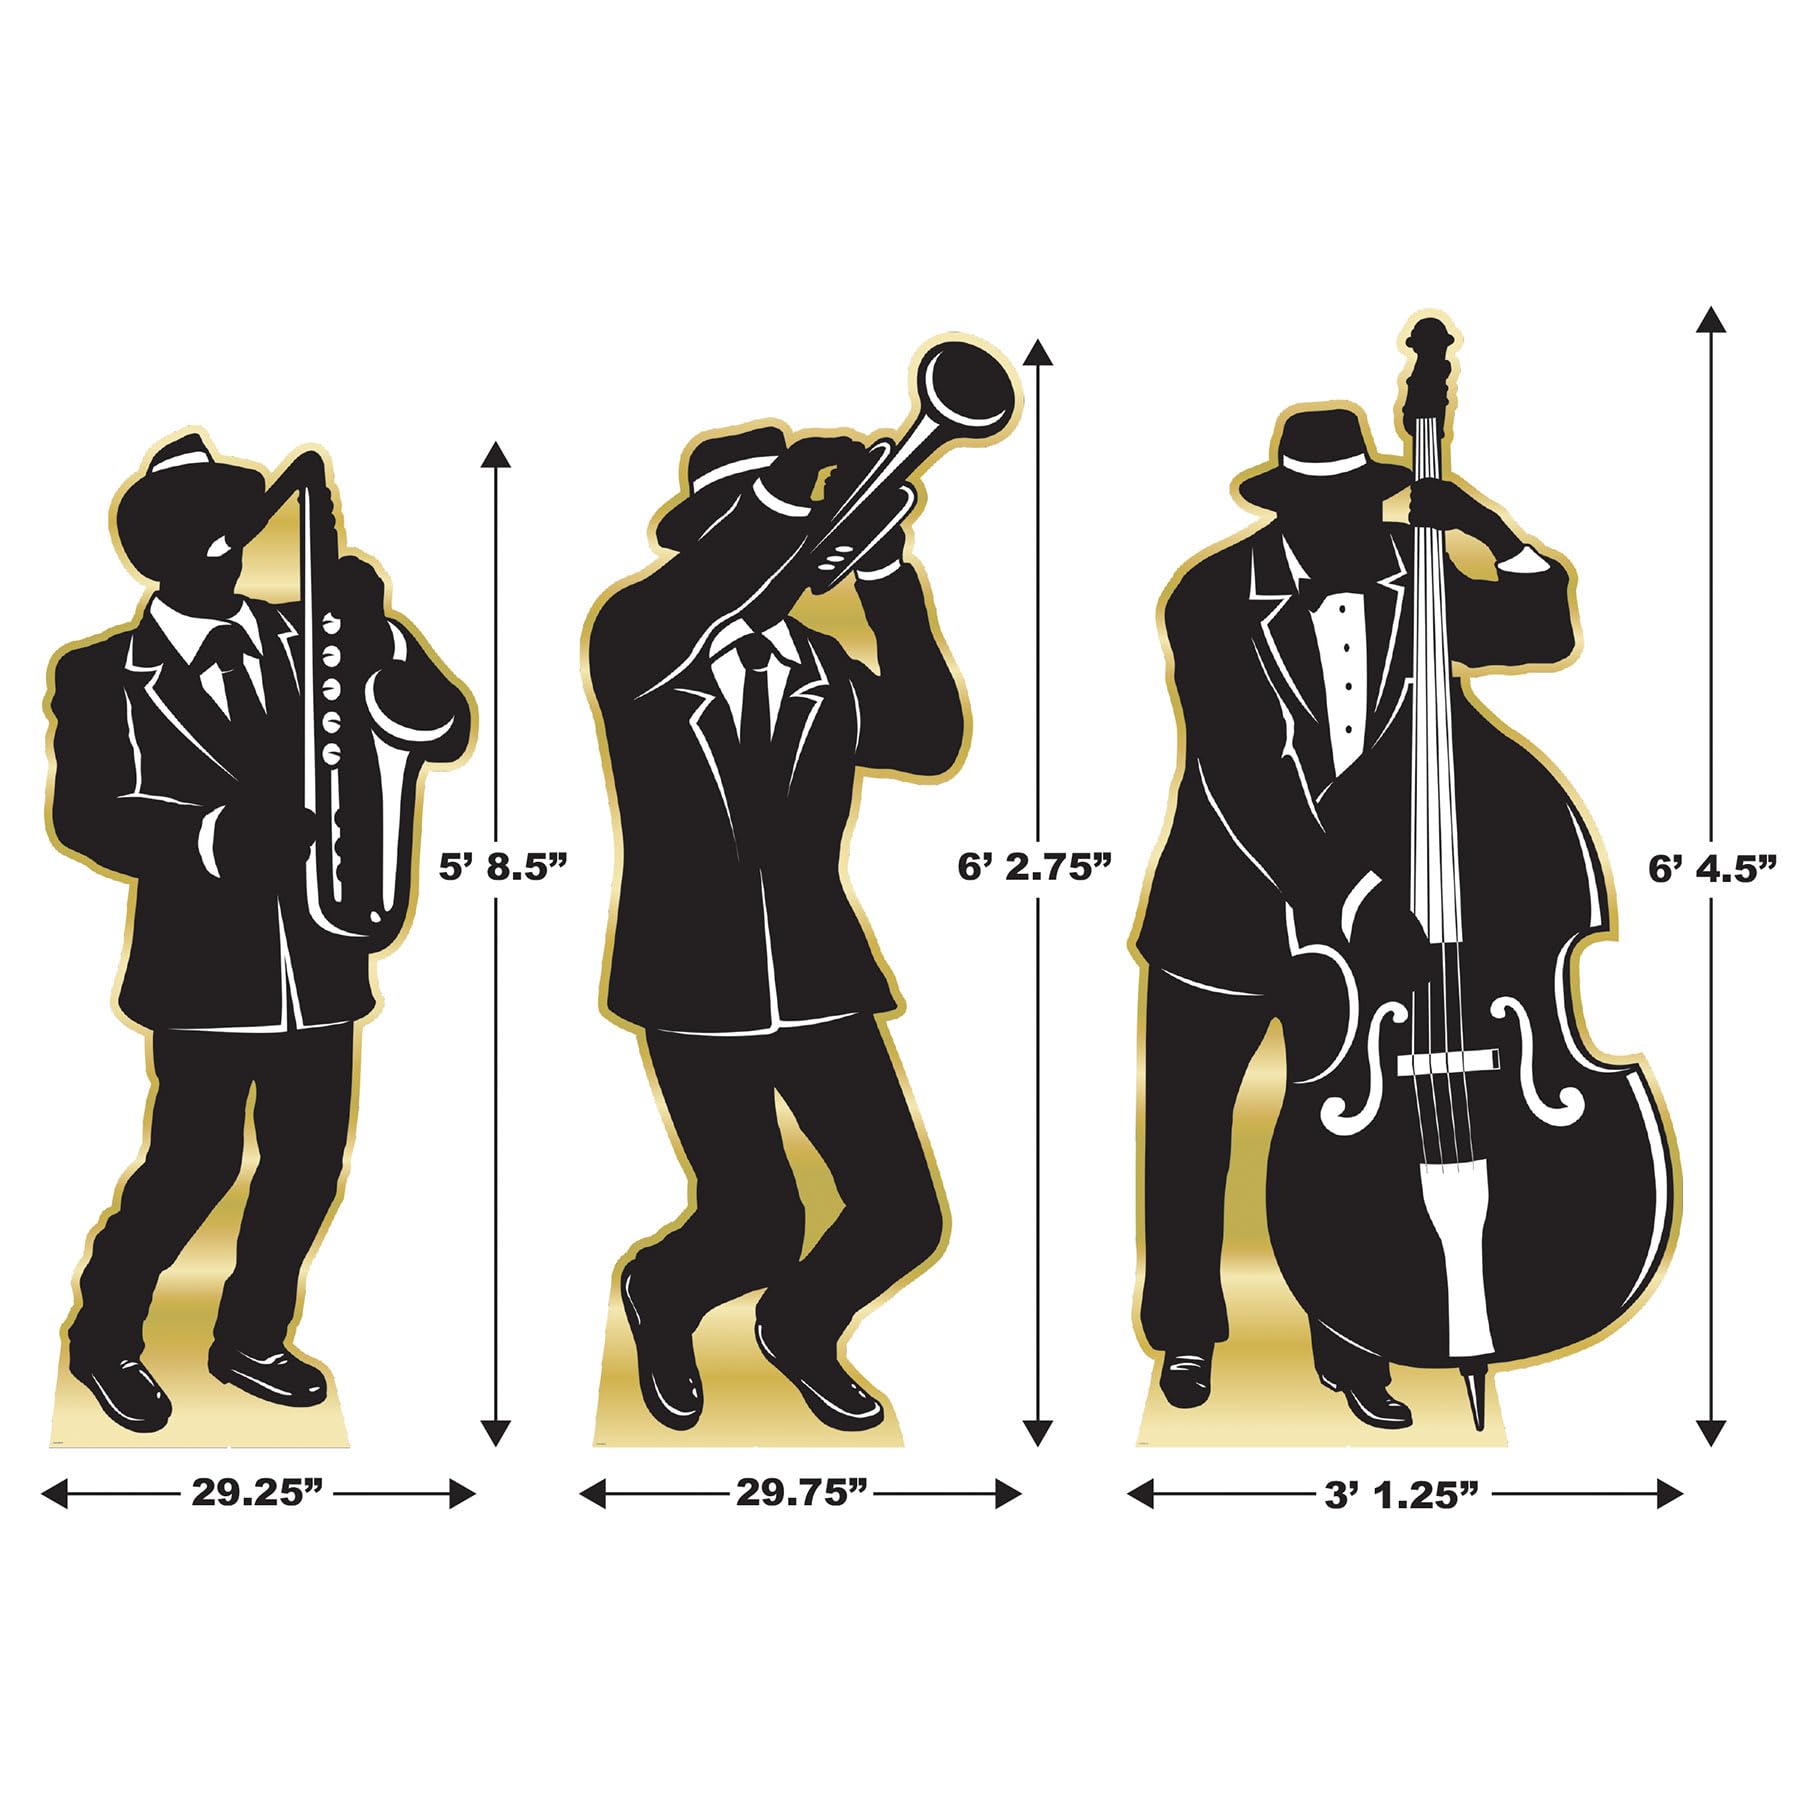 Beistle Life-Size Cardboard Great 20's Jazz Band Silhouette Stand-Ups for 1920's Prom Décor, Photo Backdrops